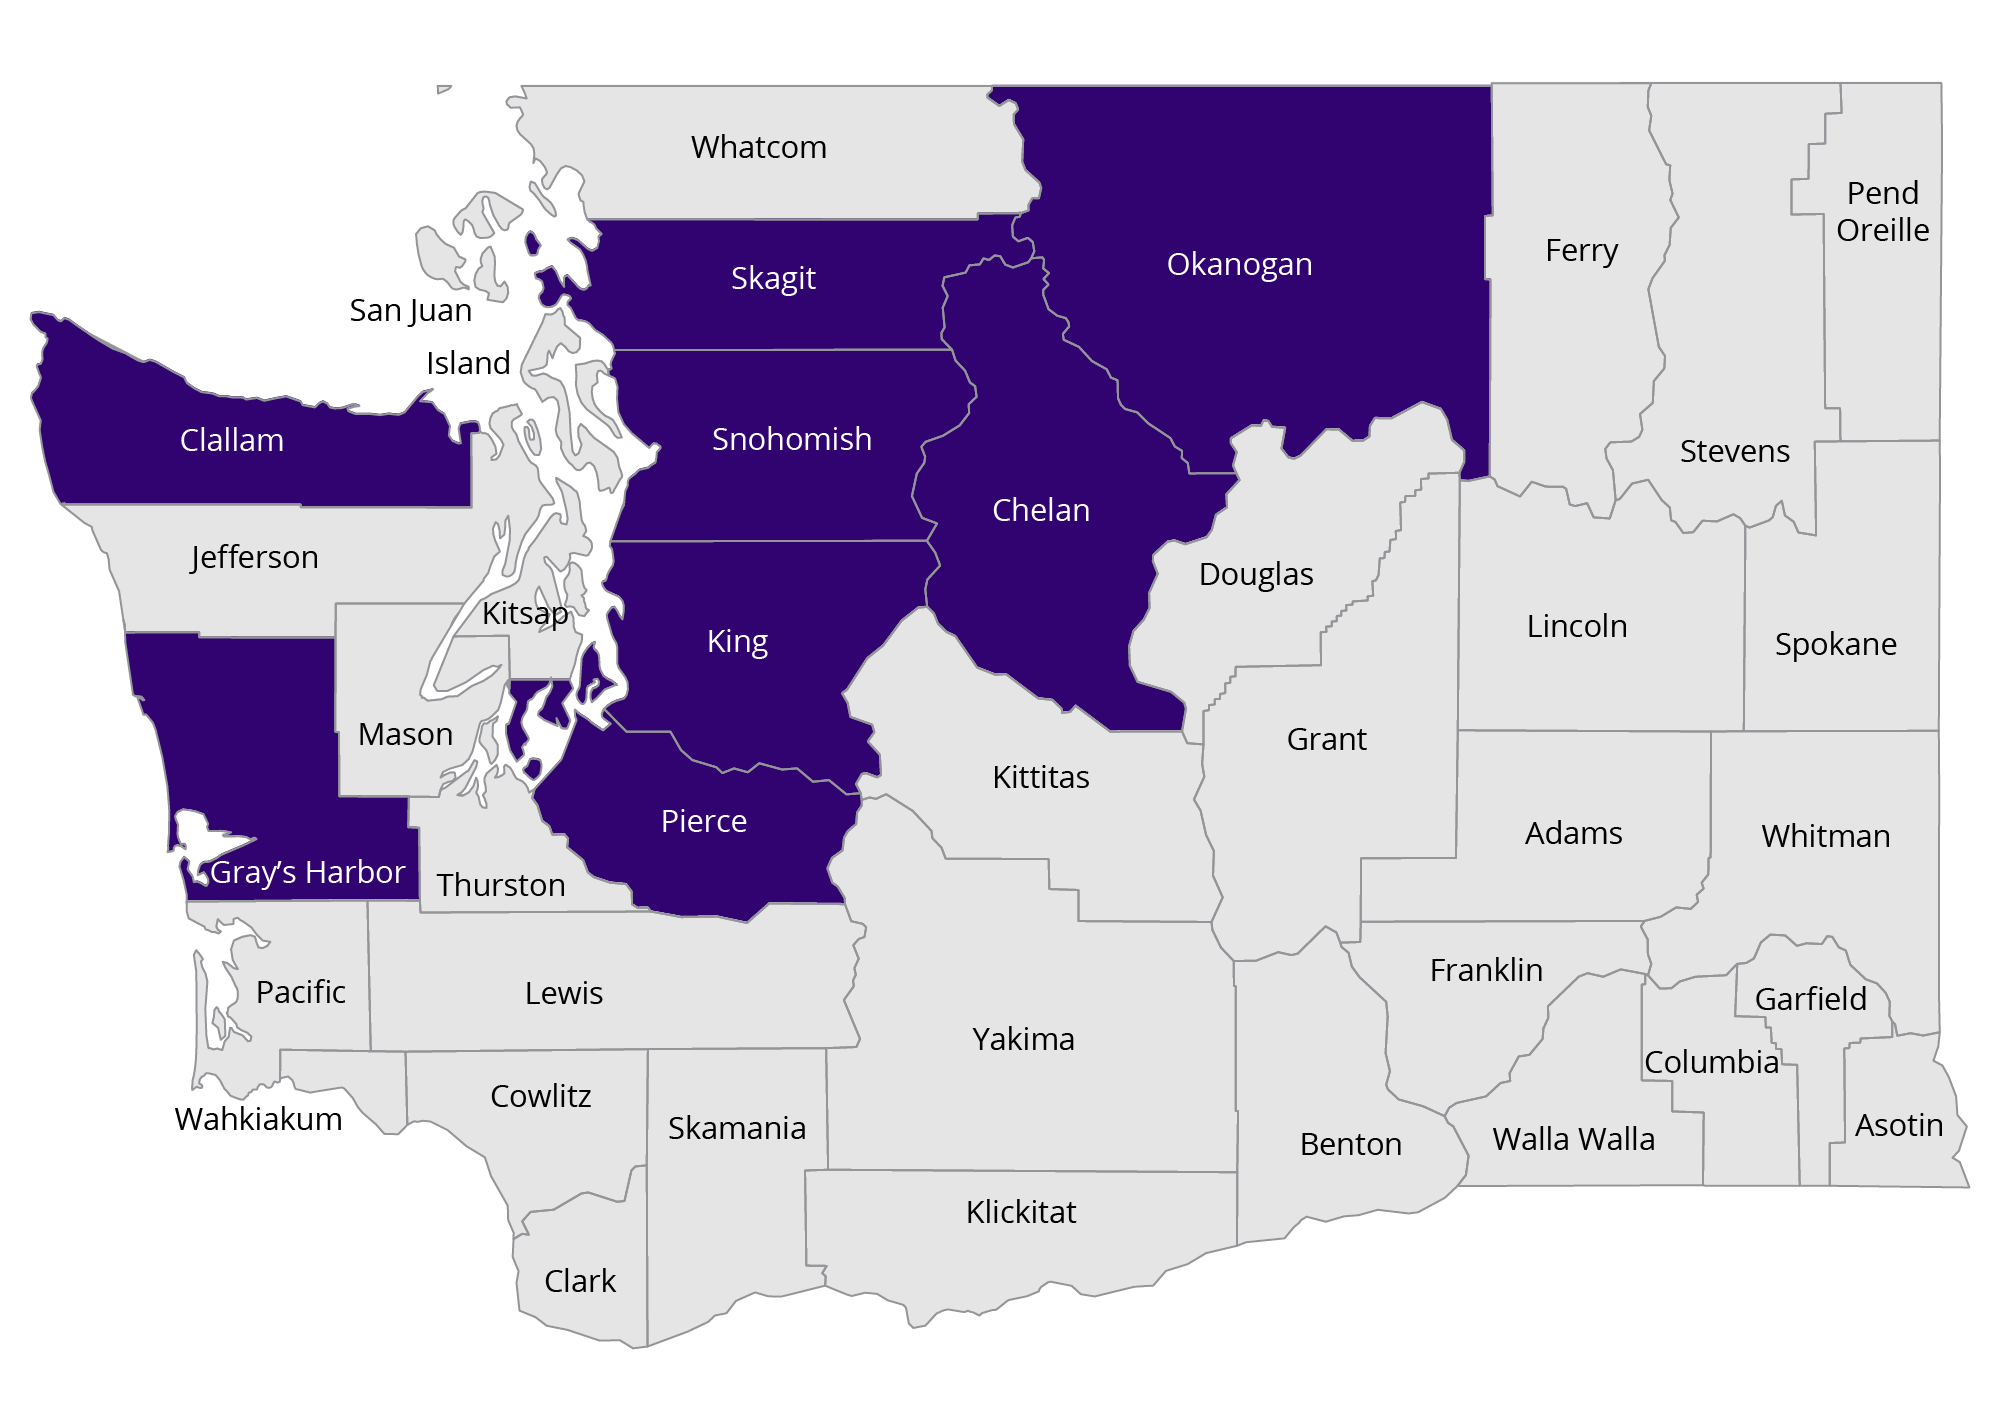 The UW Center for Exposures, Diseases, Genomics, and Environment and the UW Superfund Research Program work in the following Washington counties: Chelan, Clallam, Grays Harbor, King, Okanogan, Pierce, Skagit, and Snohomish.